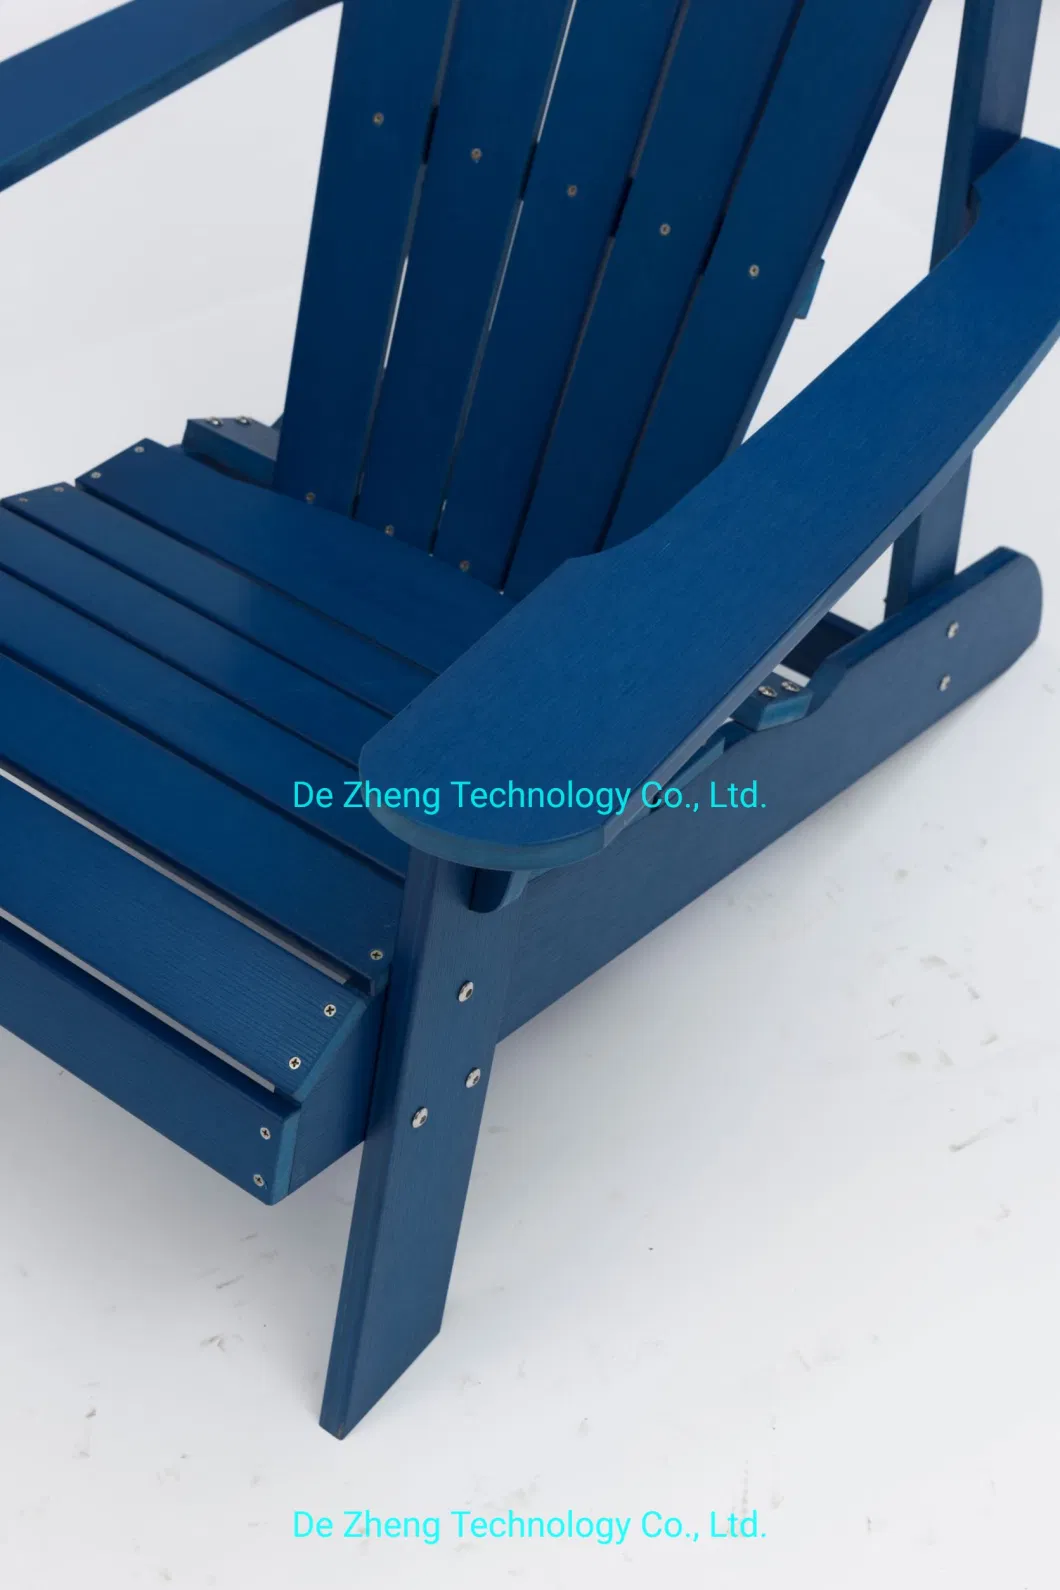 5% off Extra High and Enforce Back Support Outdoor Deck Garden Adirondack Chair for Heavy Duty